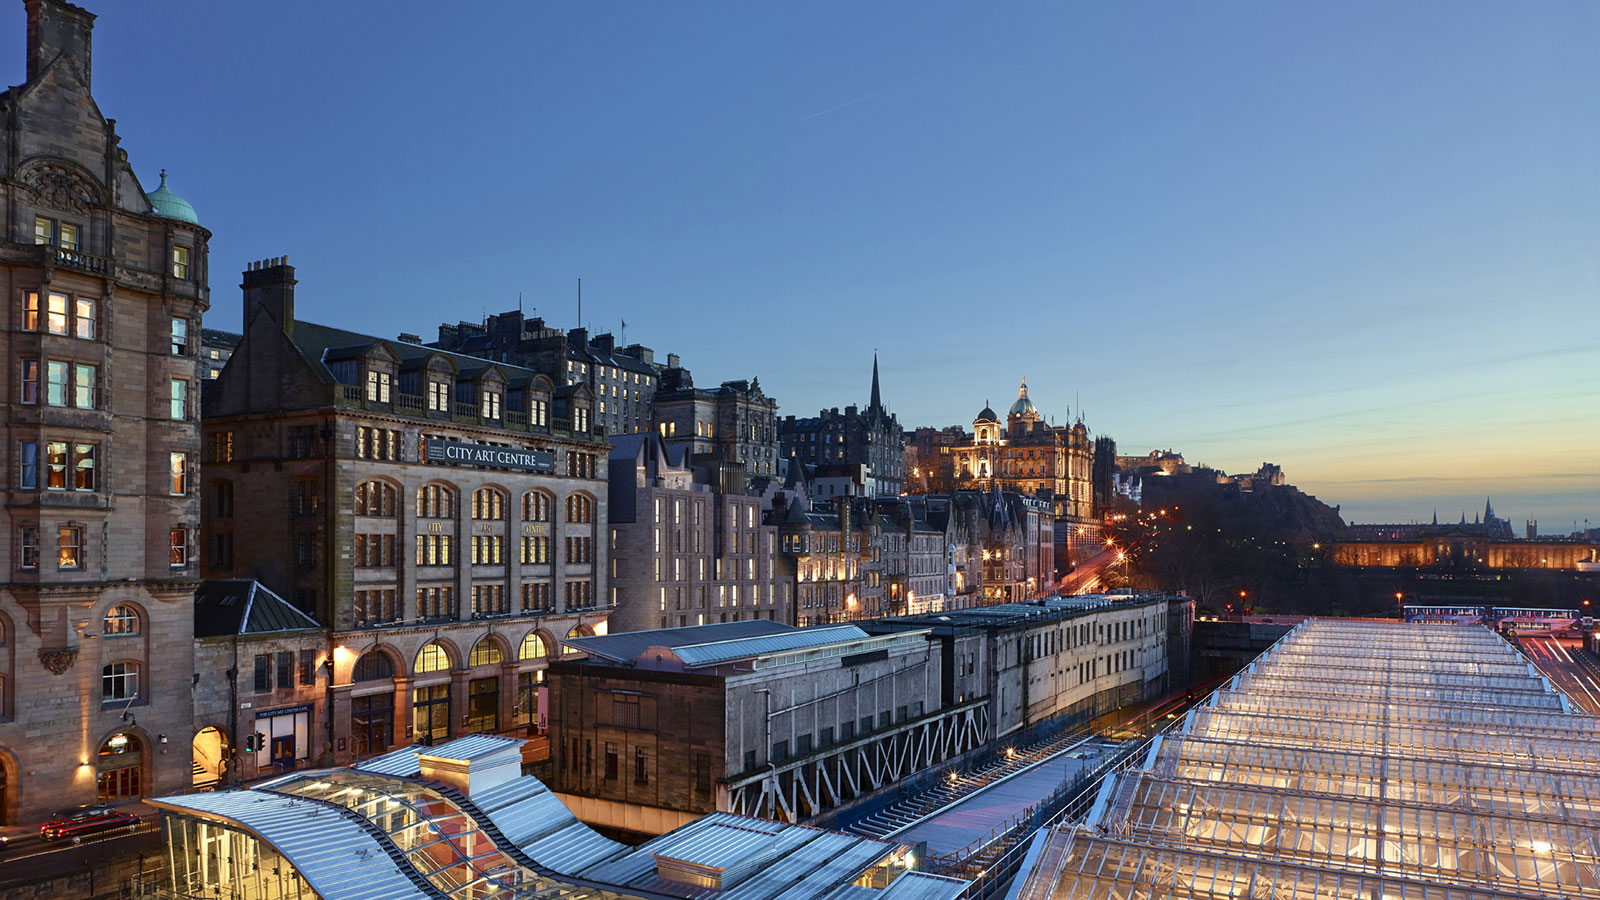 The view from the North Bridge in Edinburgh at dusk